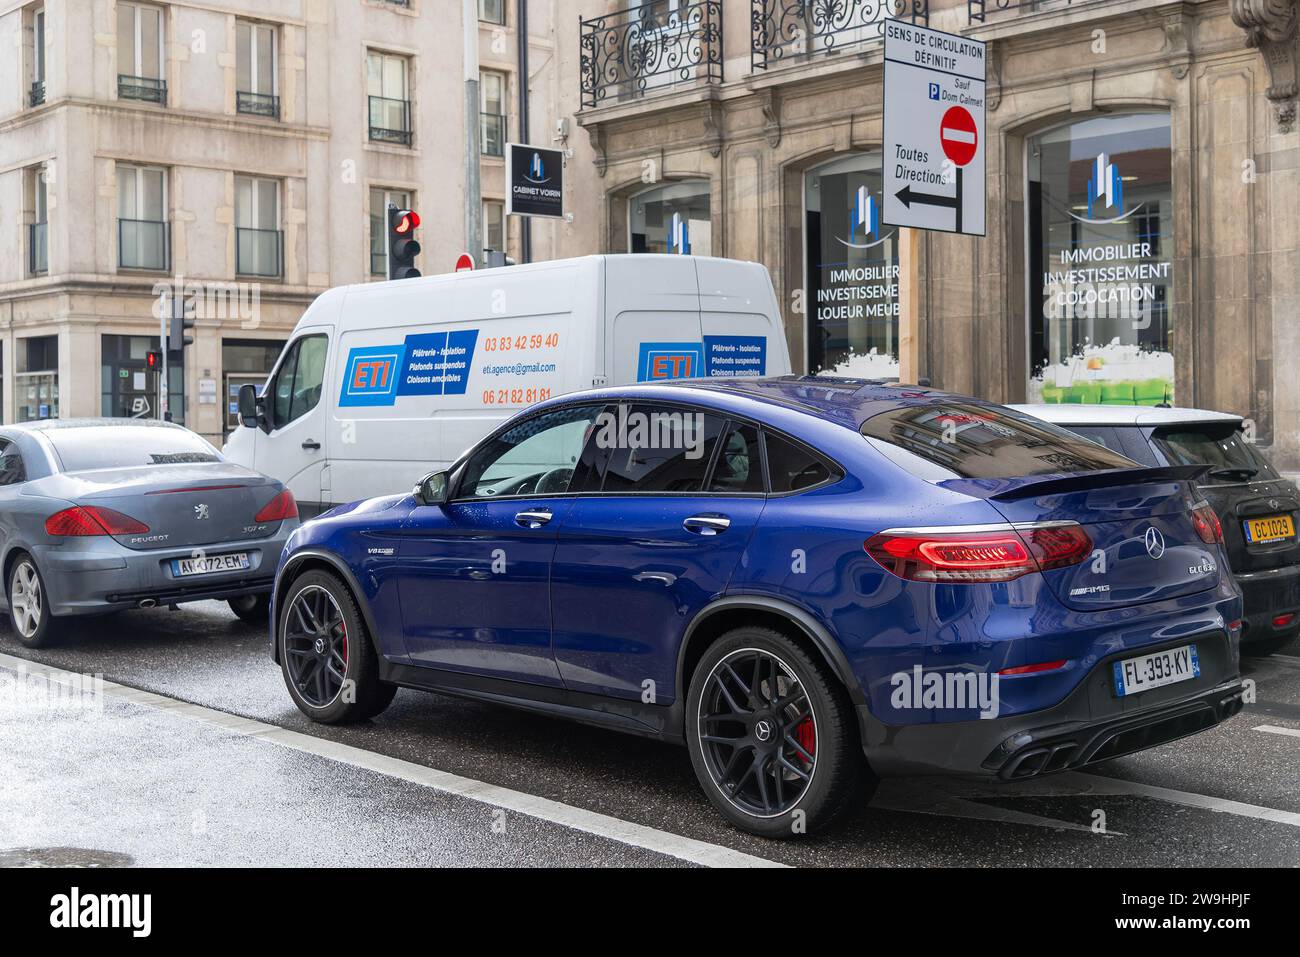 Nancy, France - Blue Mercedes-AMG GLC 63 S Coupé driving in a street. Stock Photo